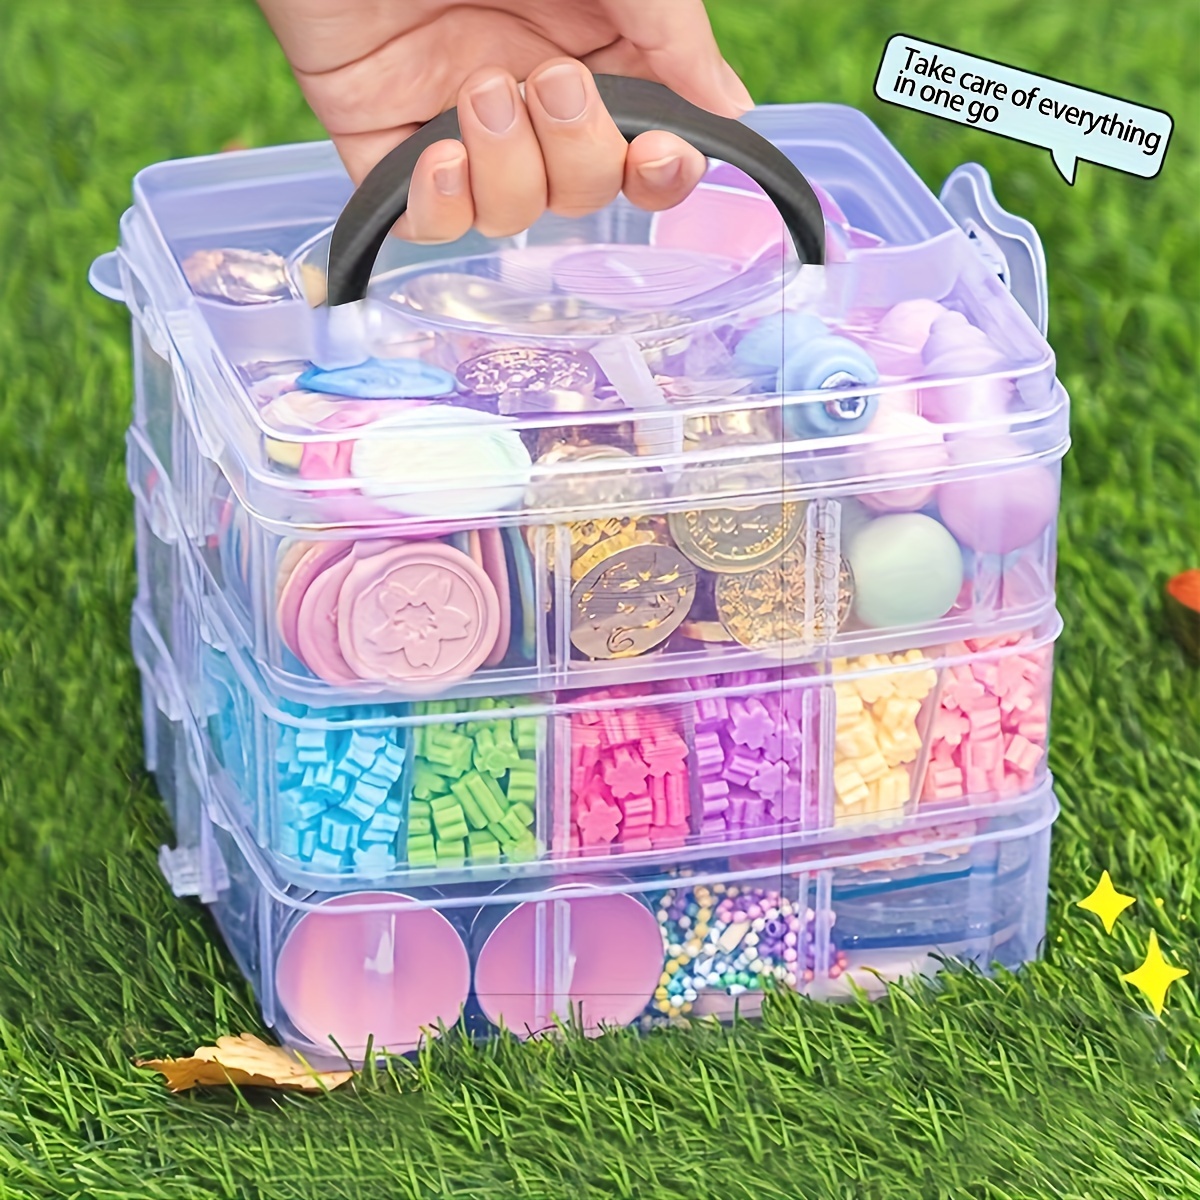 1000pcs Ultimate Art Supplies For Kids For Boys Girls School Arts Christmas  Crafts 3 Layered Storage Box - Craft Toys - AliExpress